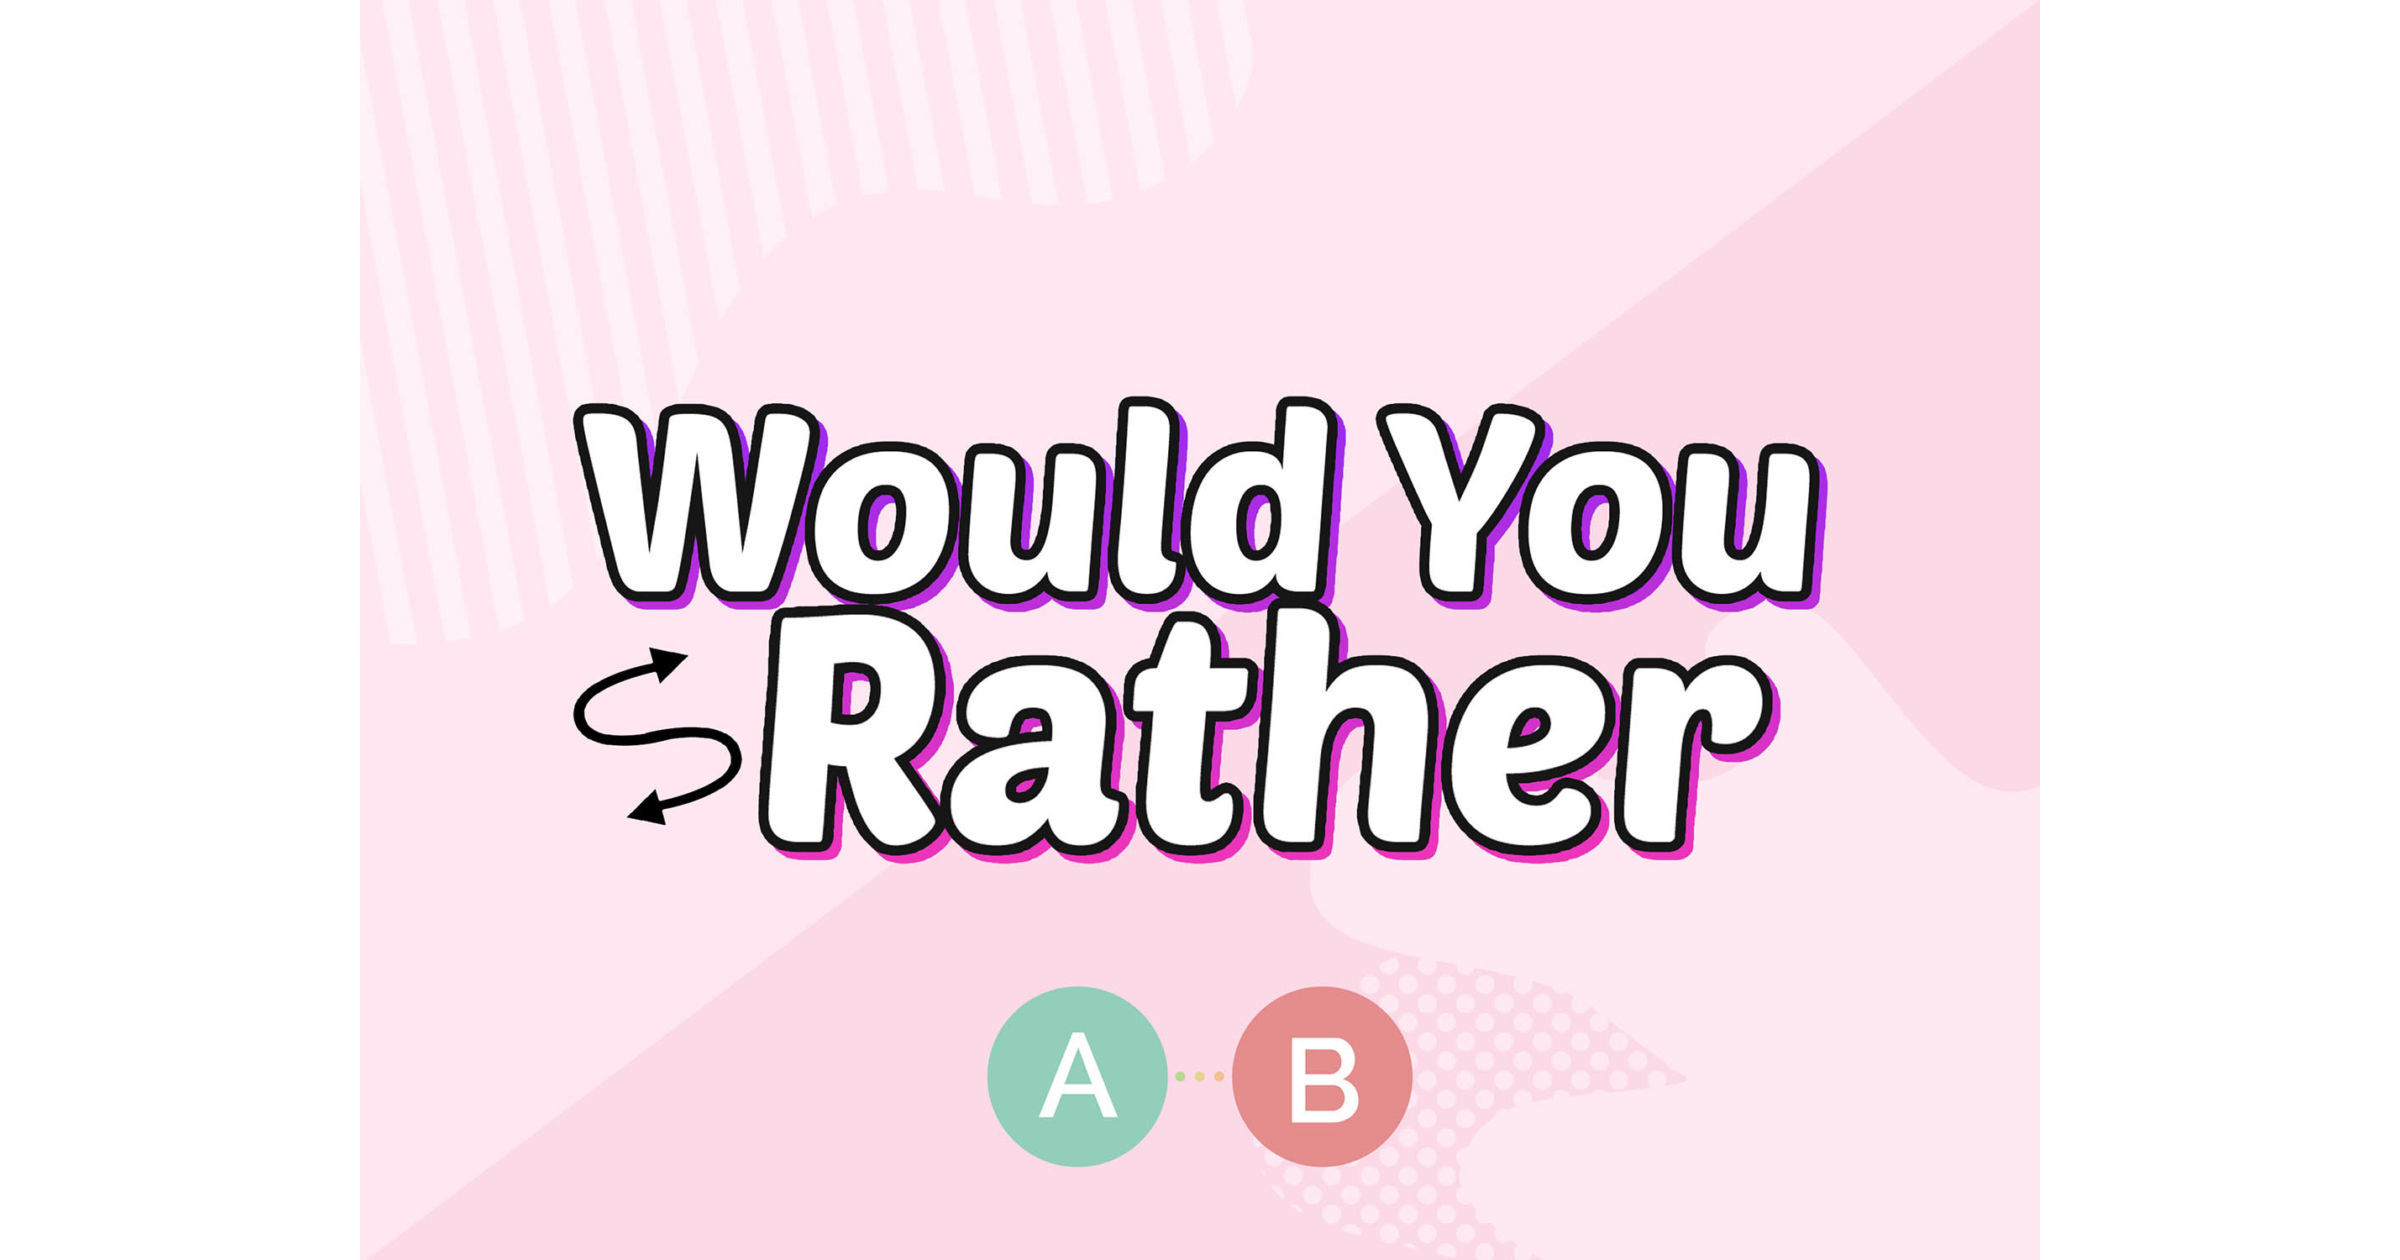 Would Your Rather Questions